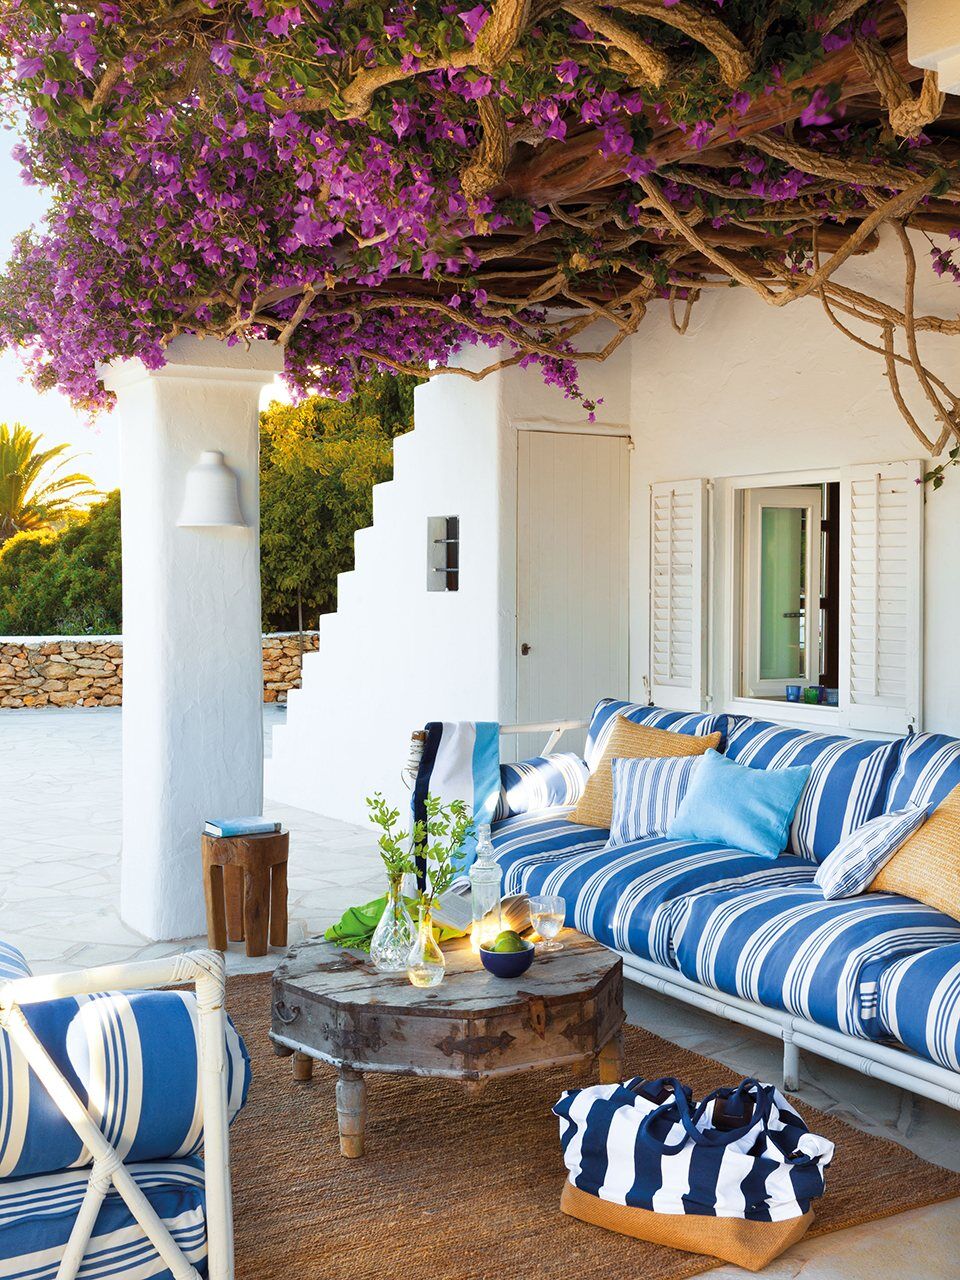 Achieving the Mediterranean Look: Bright and Breezy Interior Ideas